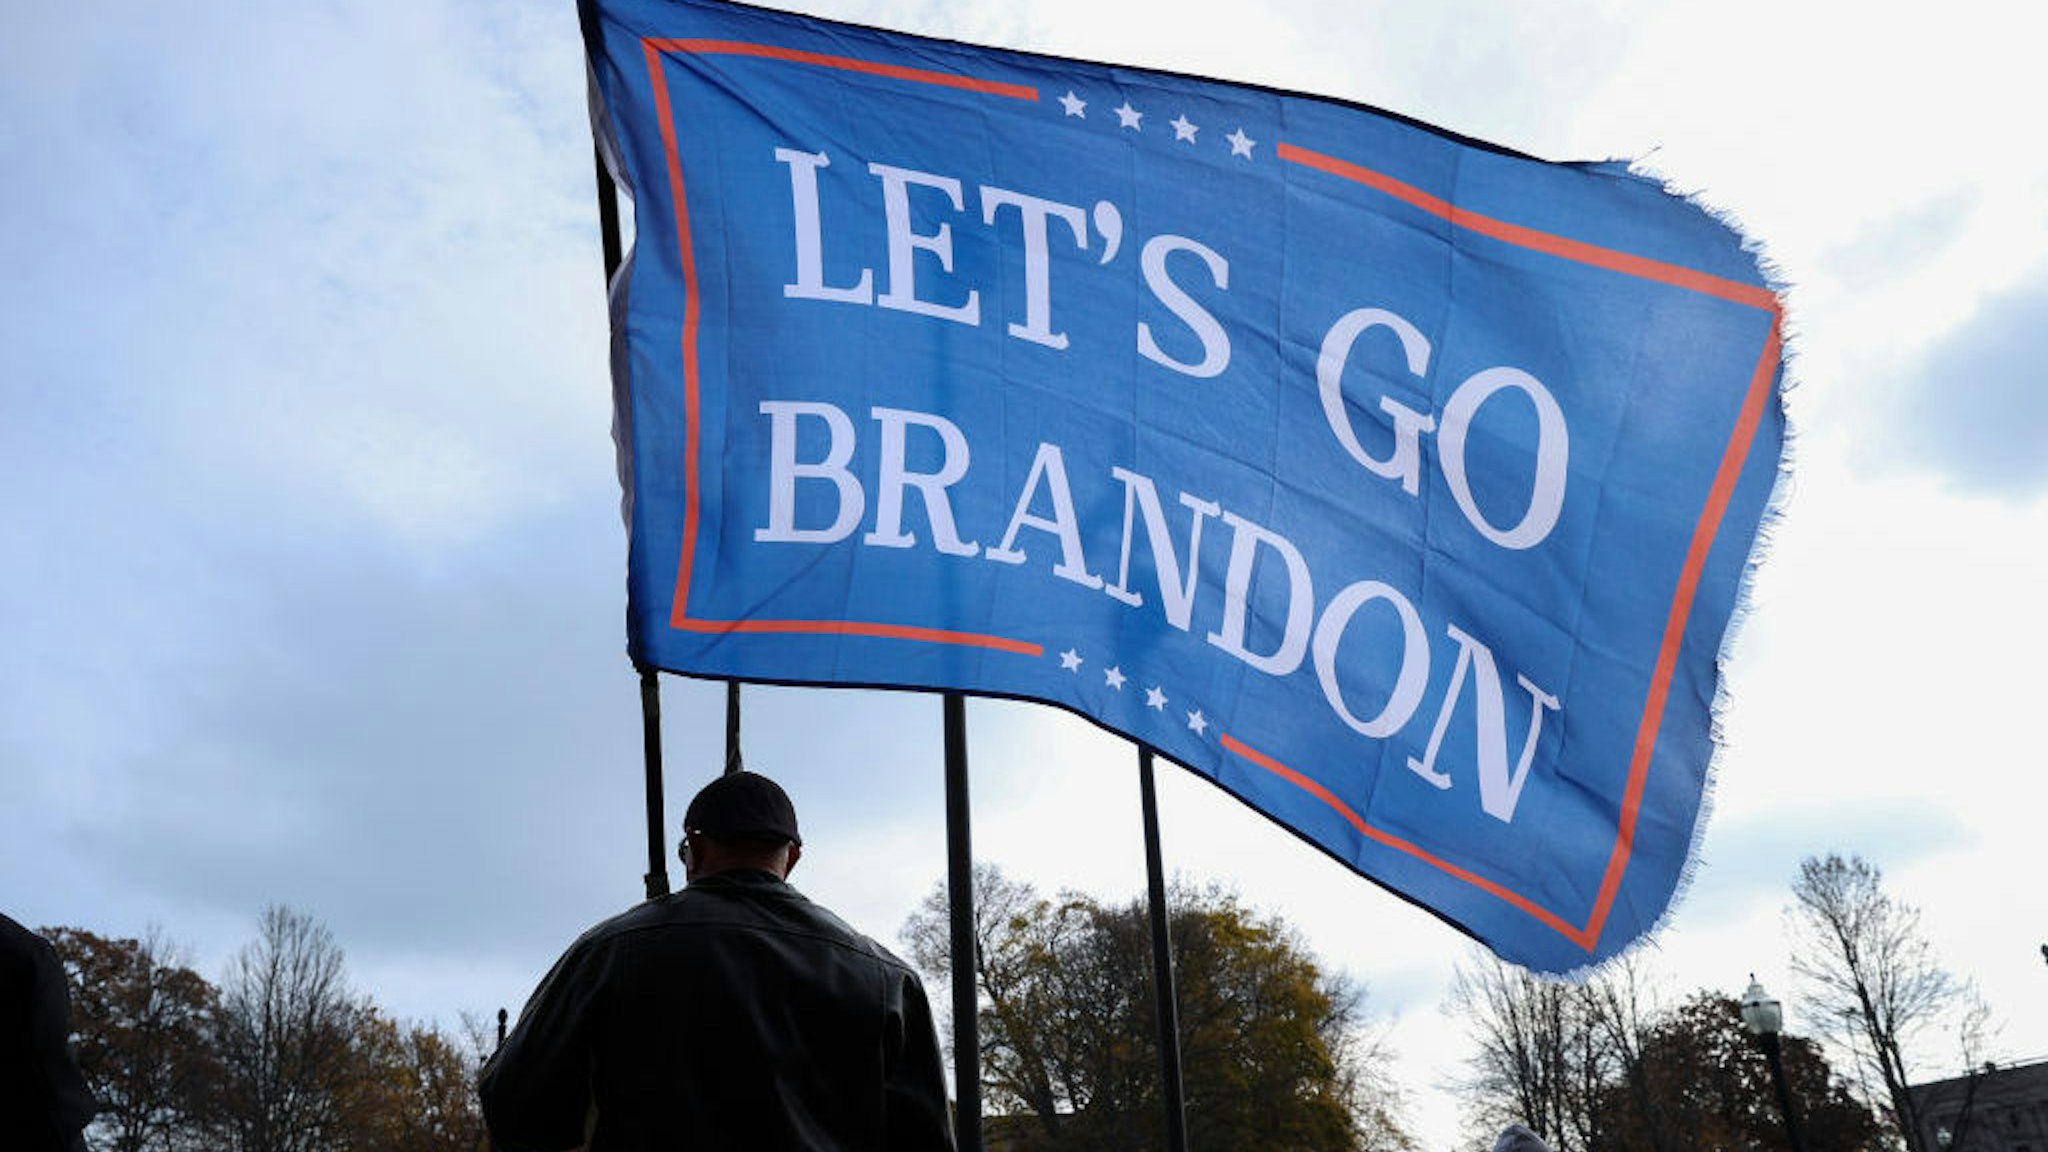 KENOSHA, WISCONSIN - NOVEMBER 16: A man flies a Lets Go Brandon flag as BLM protesters and Kyle Rittenhouse supporters are confronted outside of the Kenosha County Courthouse on closing arguments in the Kyle Rittenhouse trial in Kenosha, Wisconsin, United States on November 16, 2021. (Photo by Tayfun Coskun/Anadolu Agency via Getty Images)